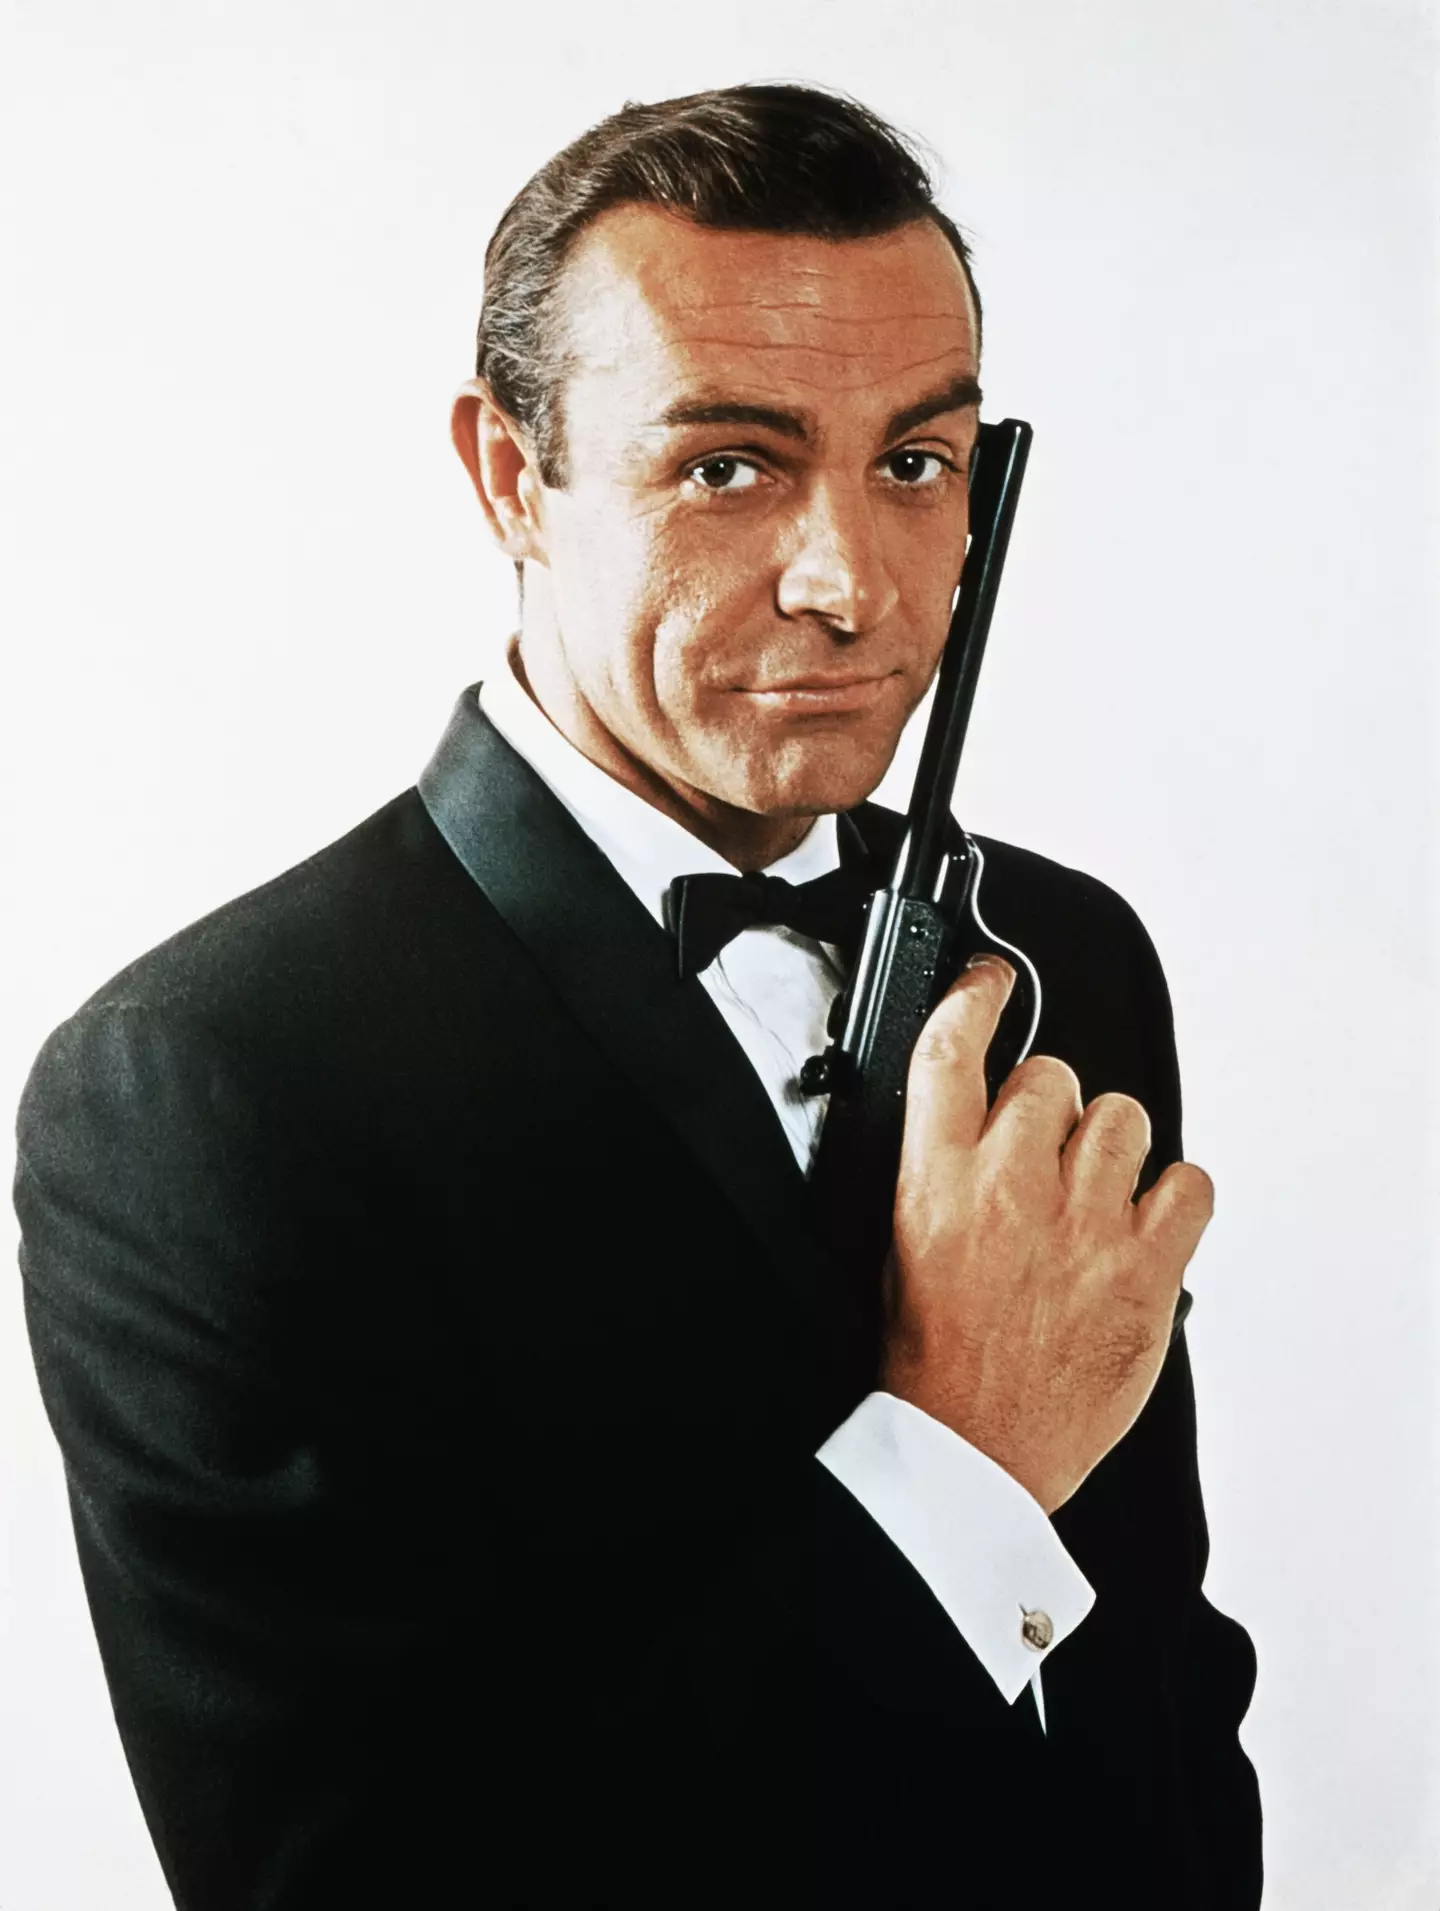 Two of the earlier James Bond movies included trigger warnings.